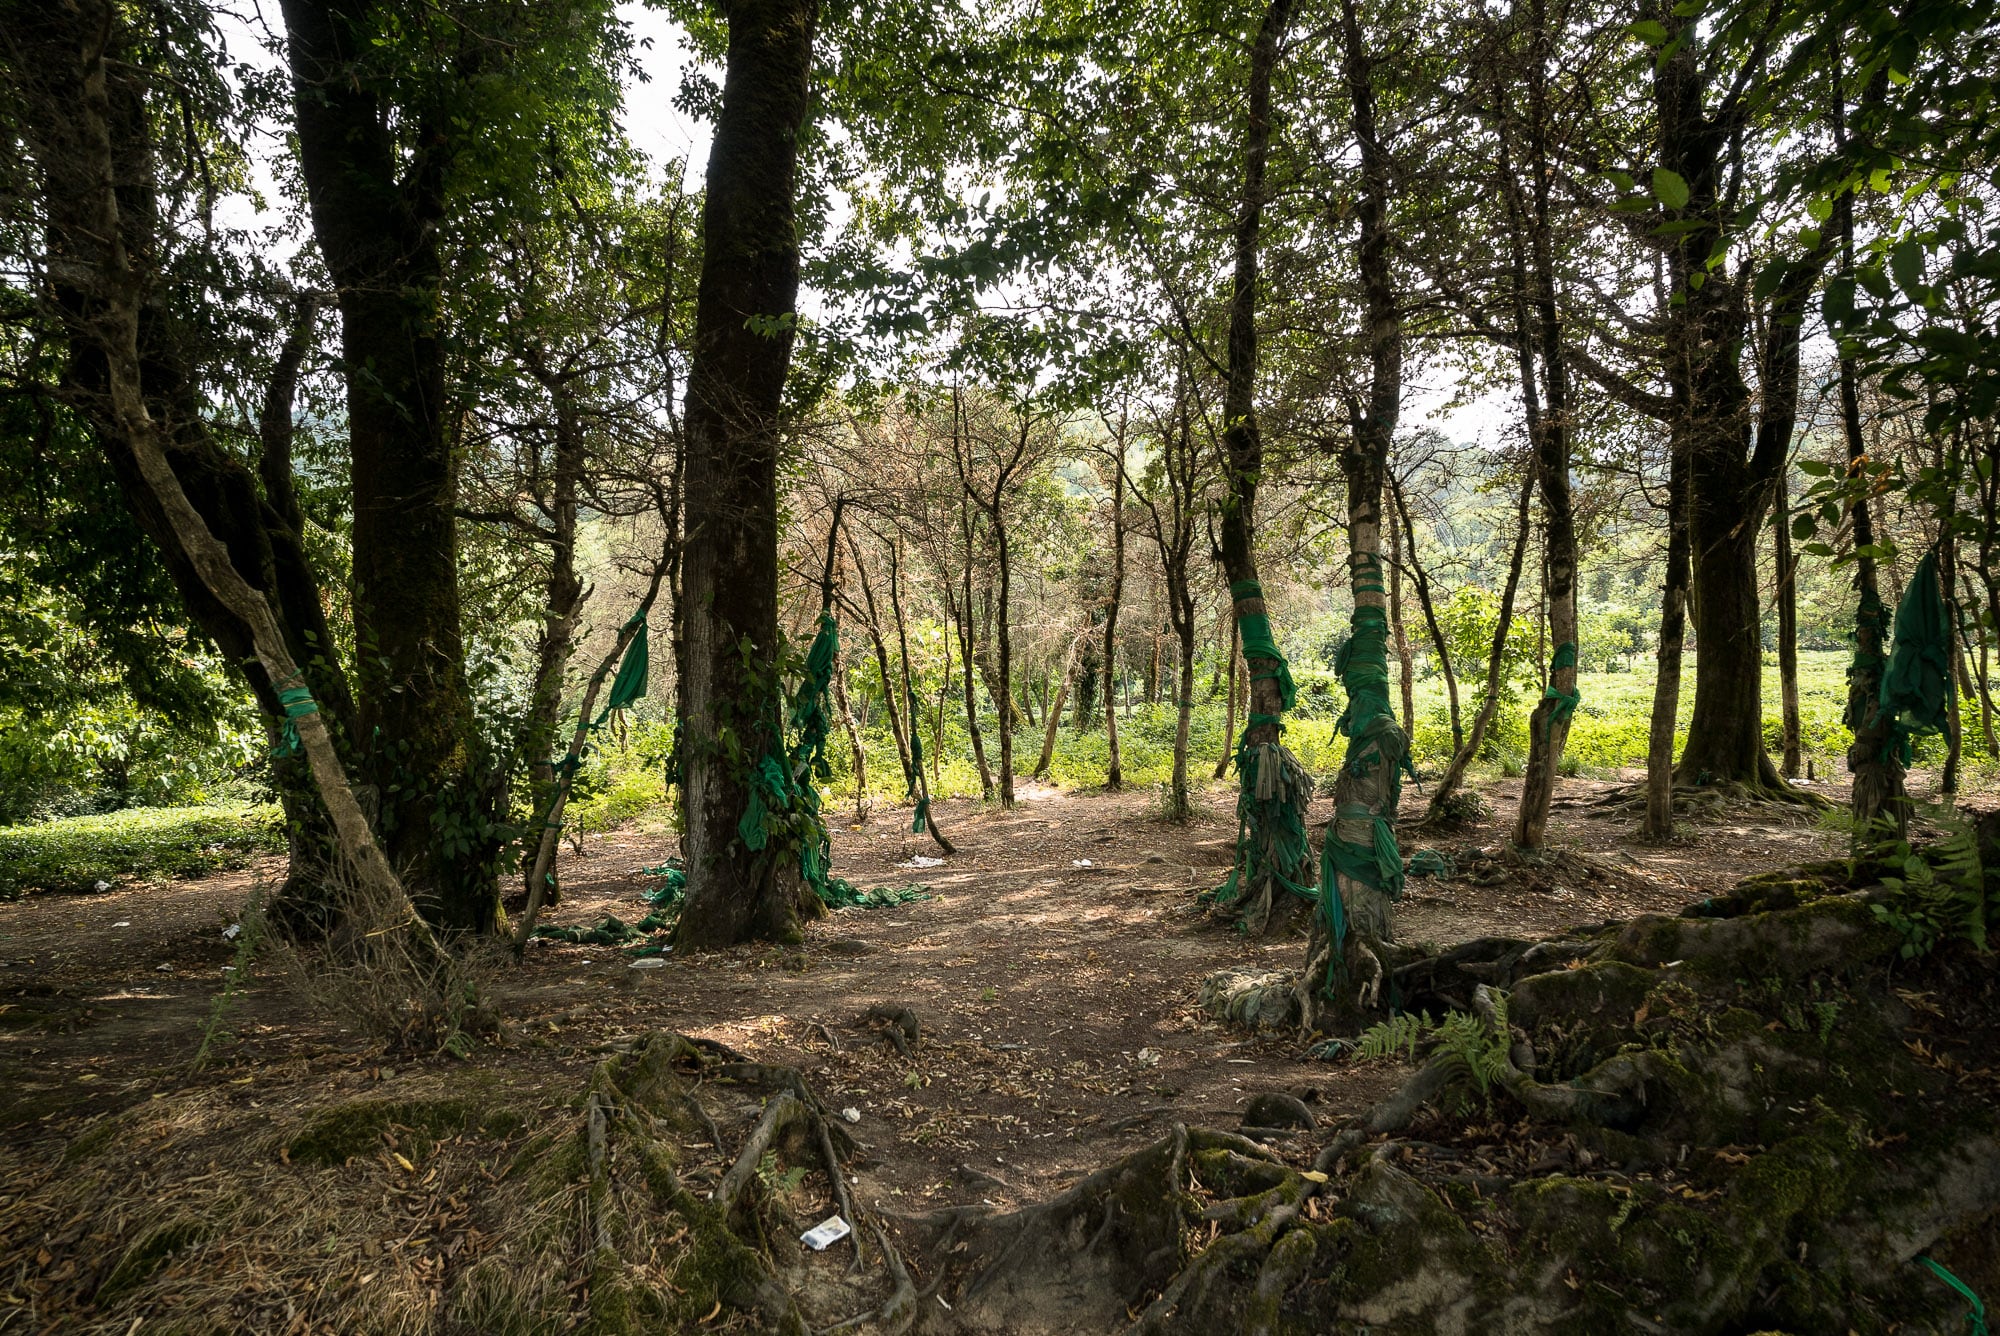 green ribbons on trees